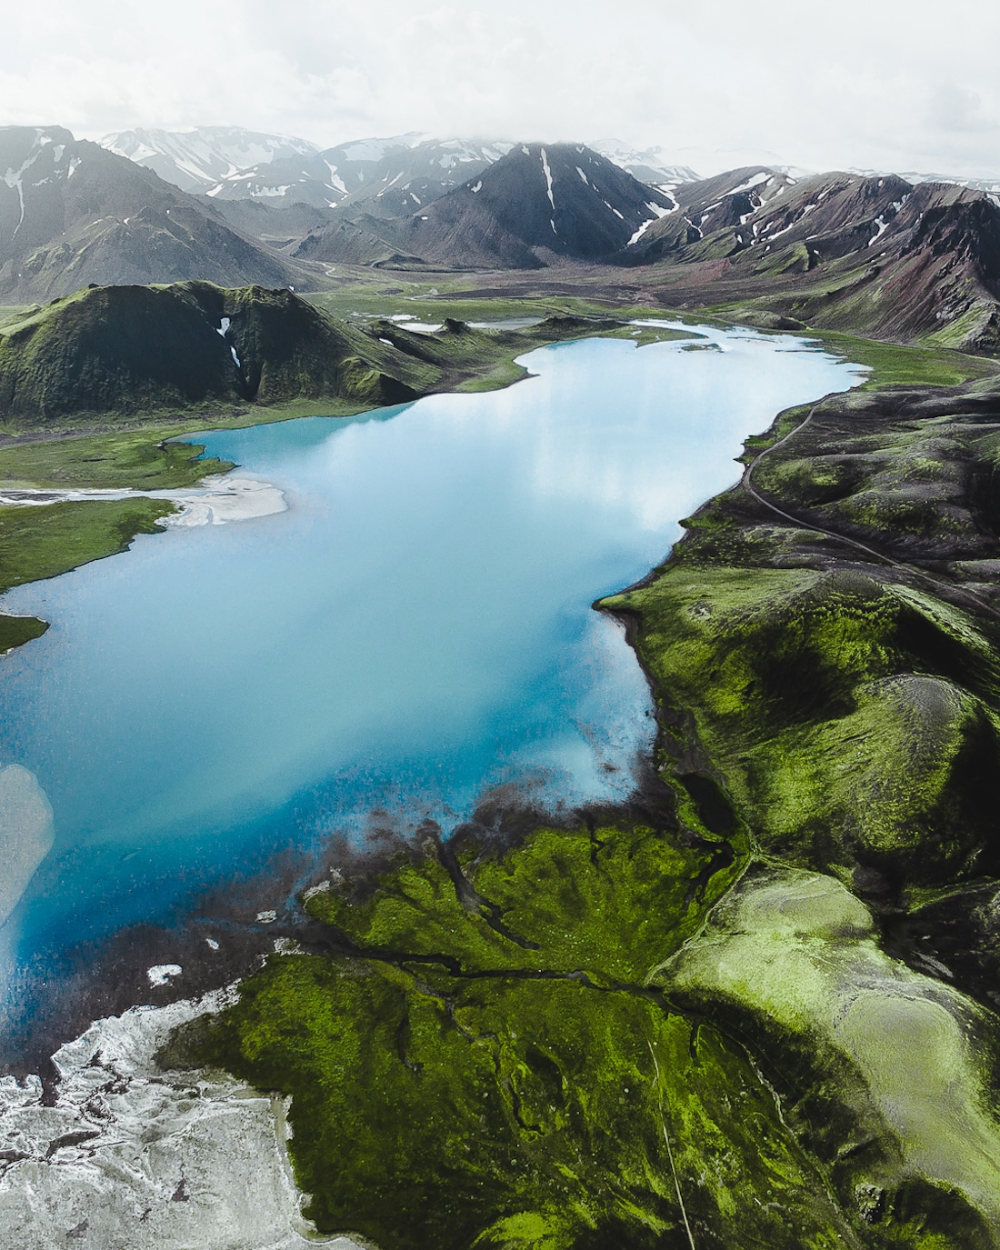 Interview: Former Musician Captures the Silent Serenity of Iceland’s Majestic Mountains